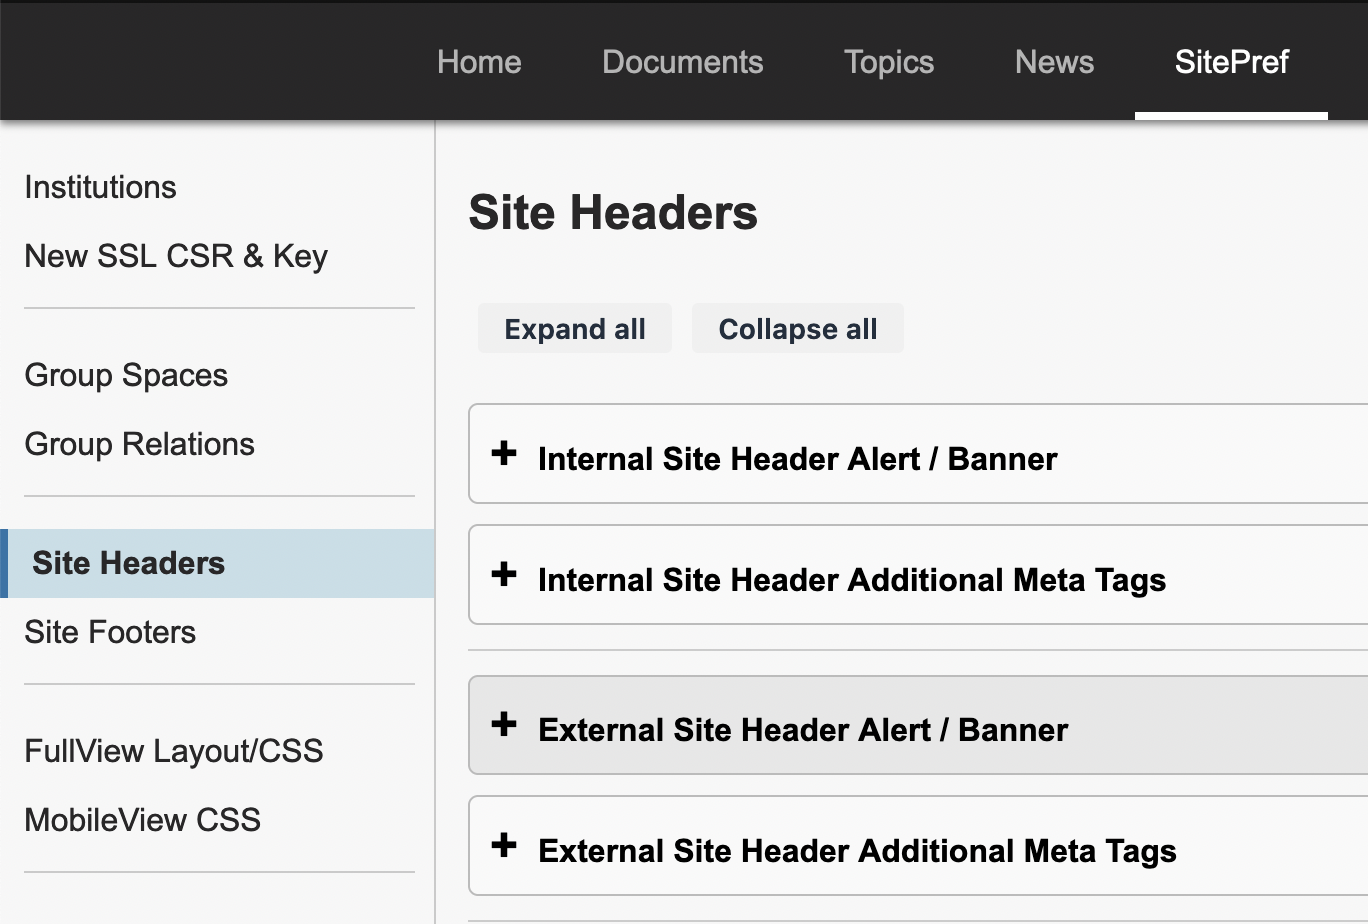 Image of the open Site Headers page under the SitePref tab. The panels for all four fields are collapsed by default.